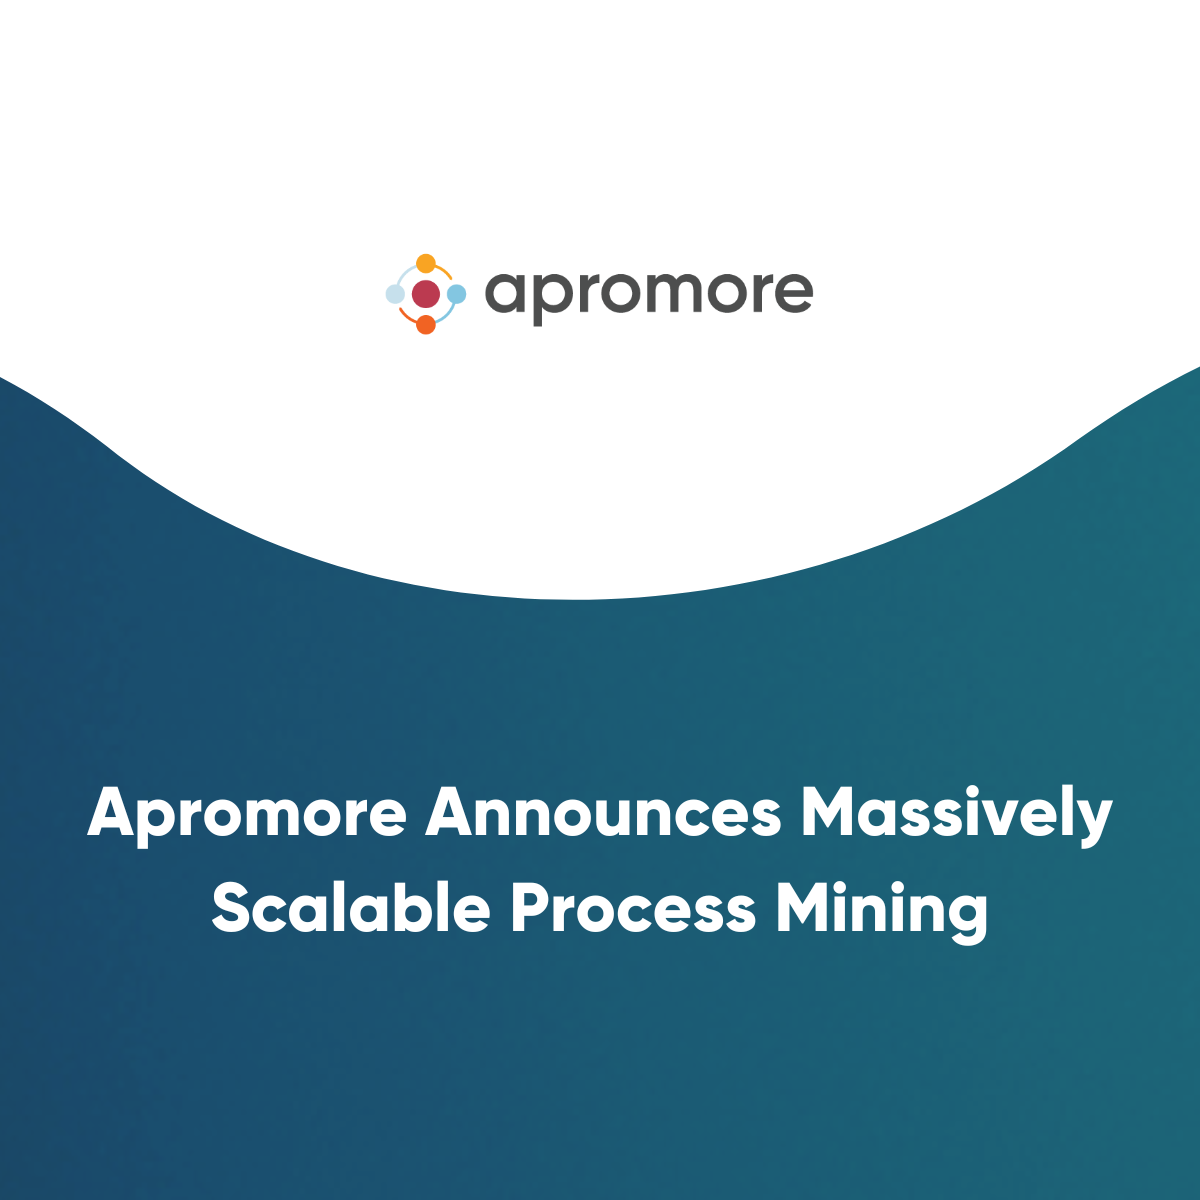 Apromore Announces Massively Scalable Process Mining